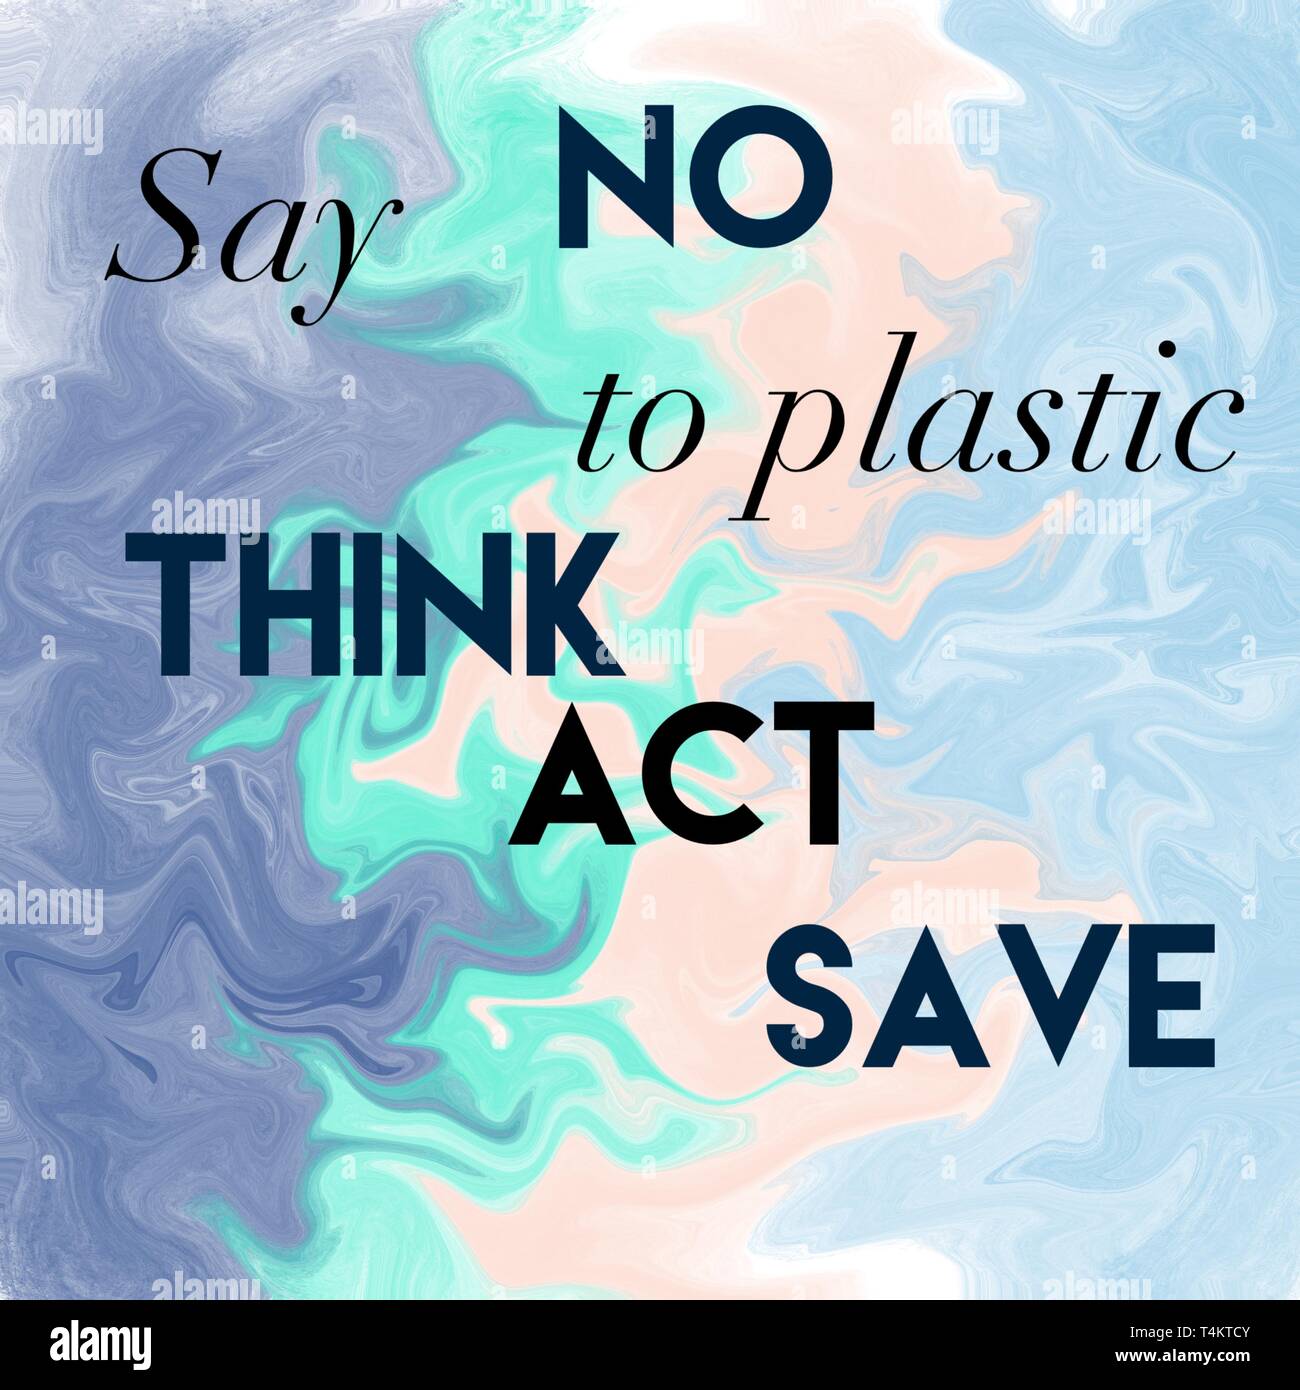 Say No To Plastic. Think Act Save. Positive Slogan. Stock Photo